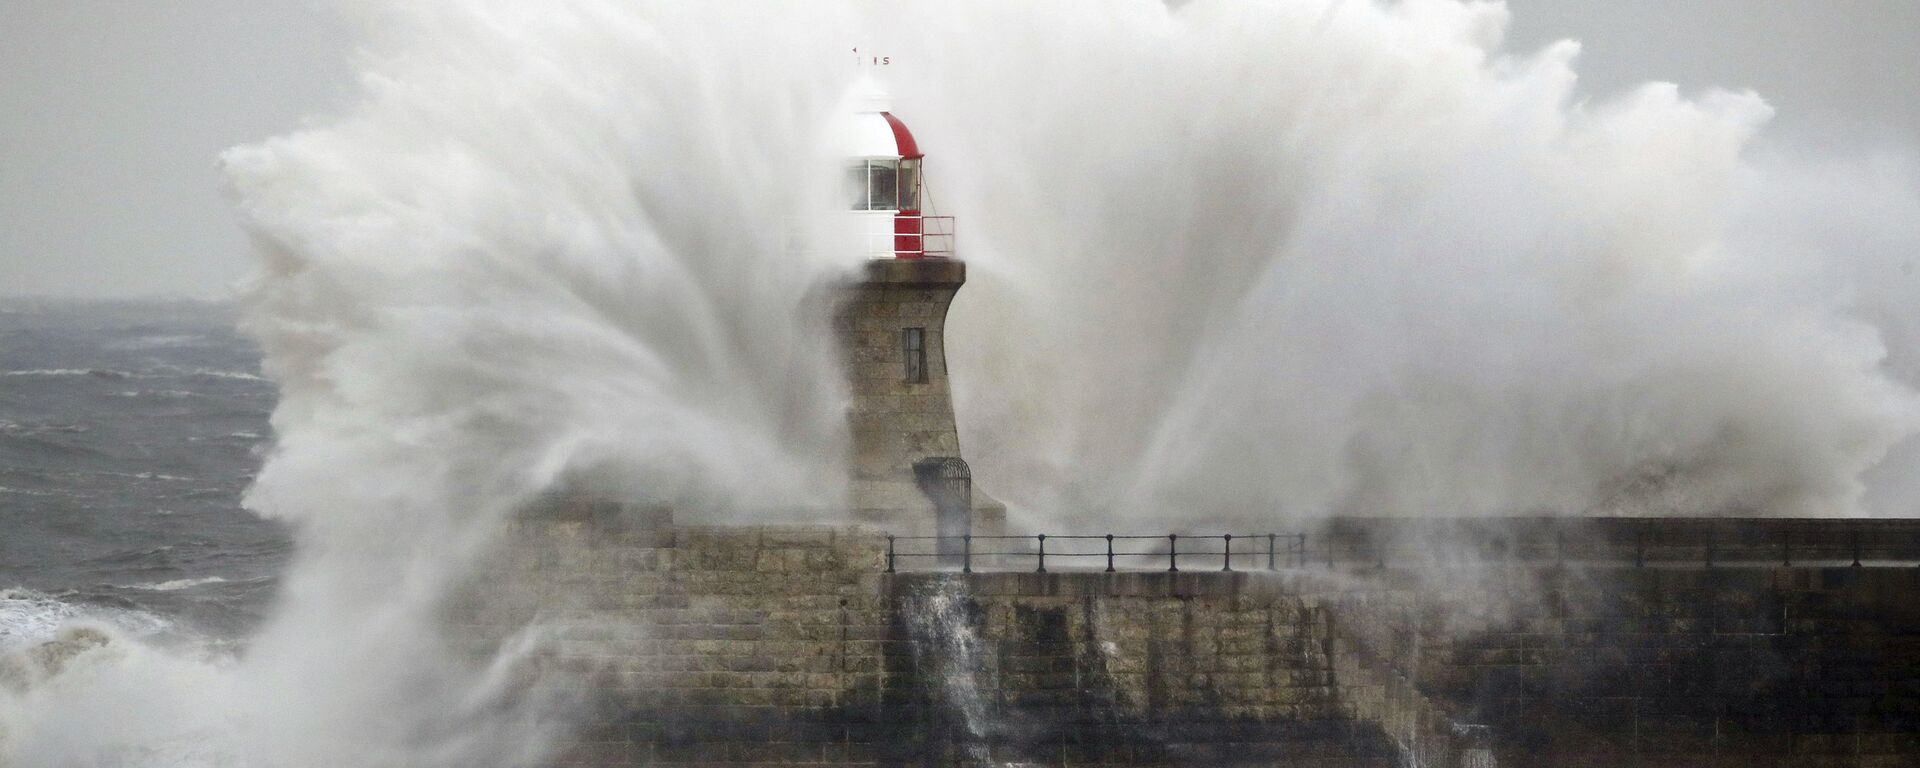 Giant waves crash over Souter Lighthouse in South Shields in Tynemouth, England, Friday, March 2, 2018 as extreme weather has continued to wreak havoc across the UK - Sputnik International, 1920, 18.02.2022